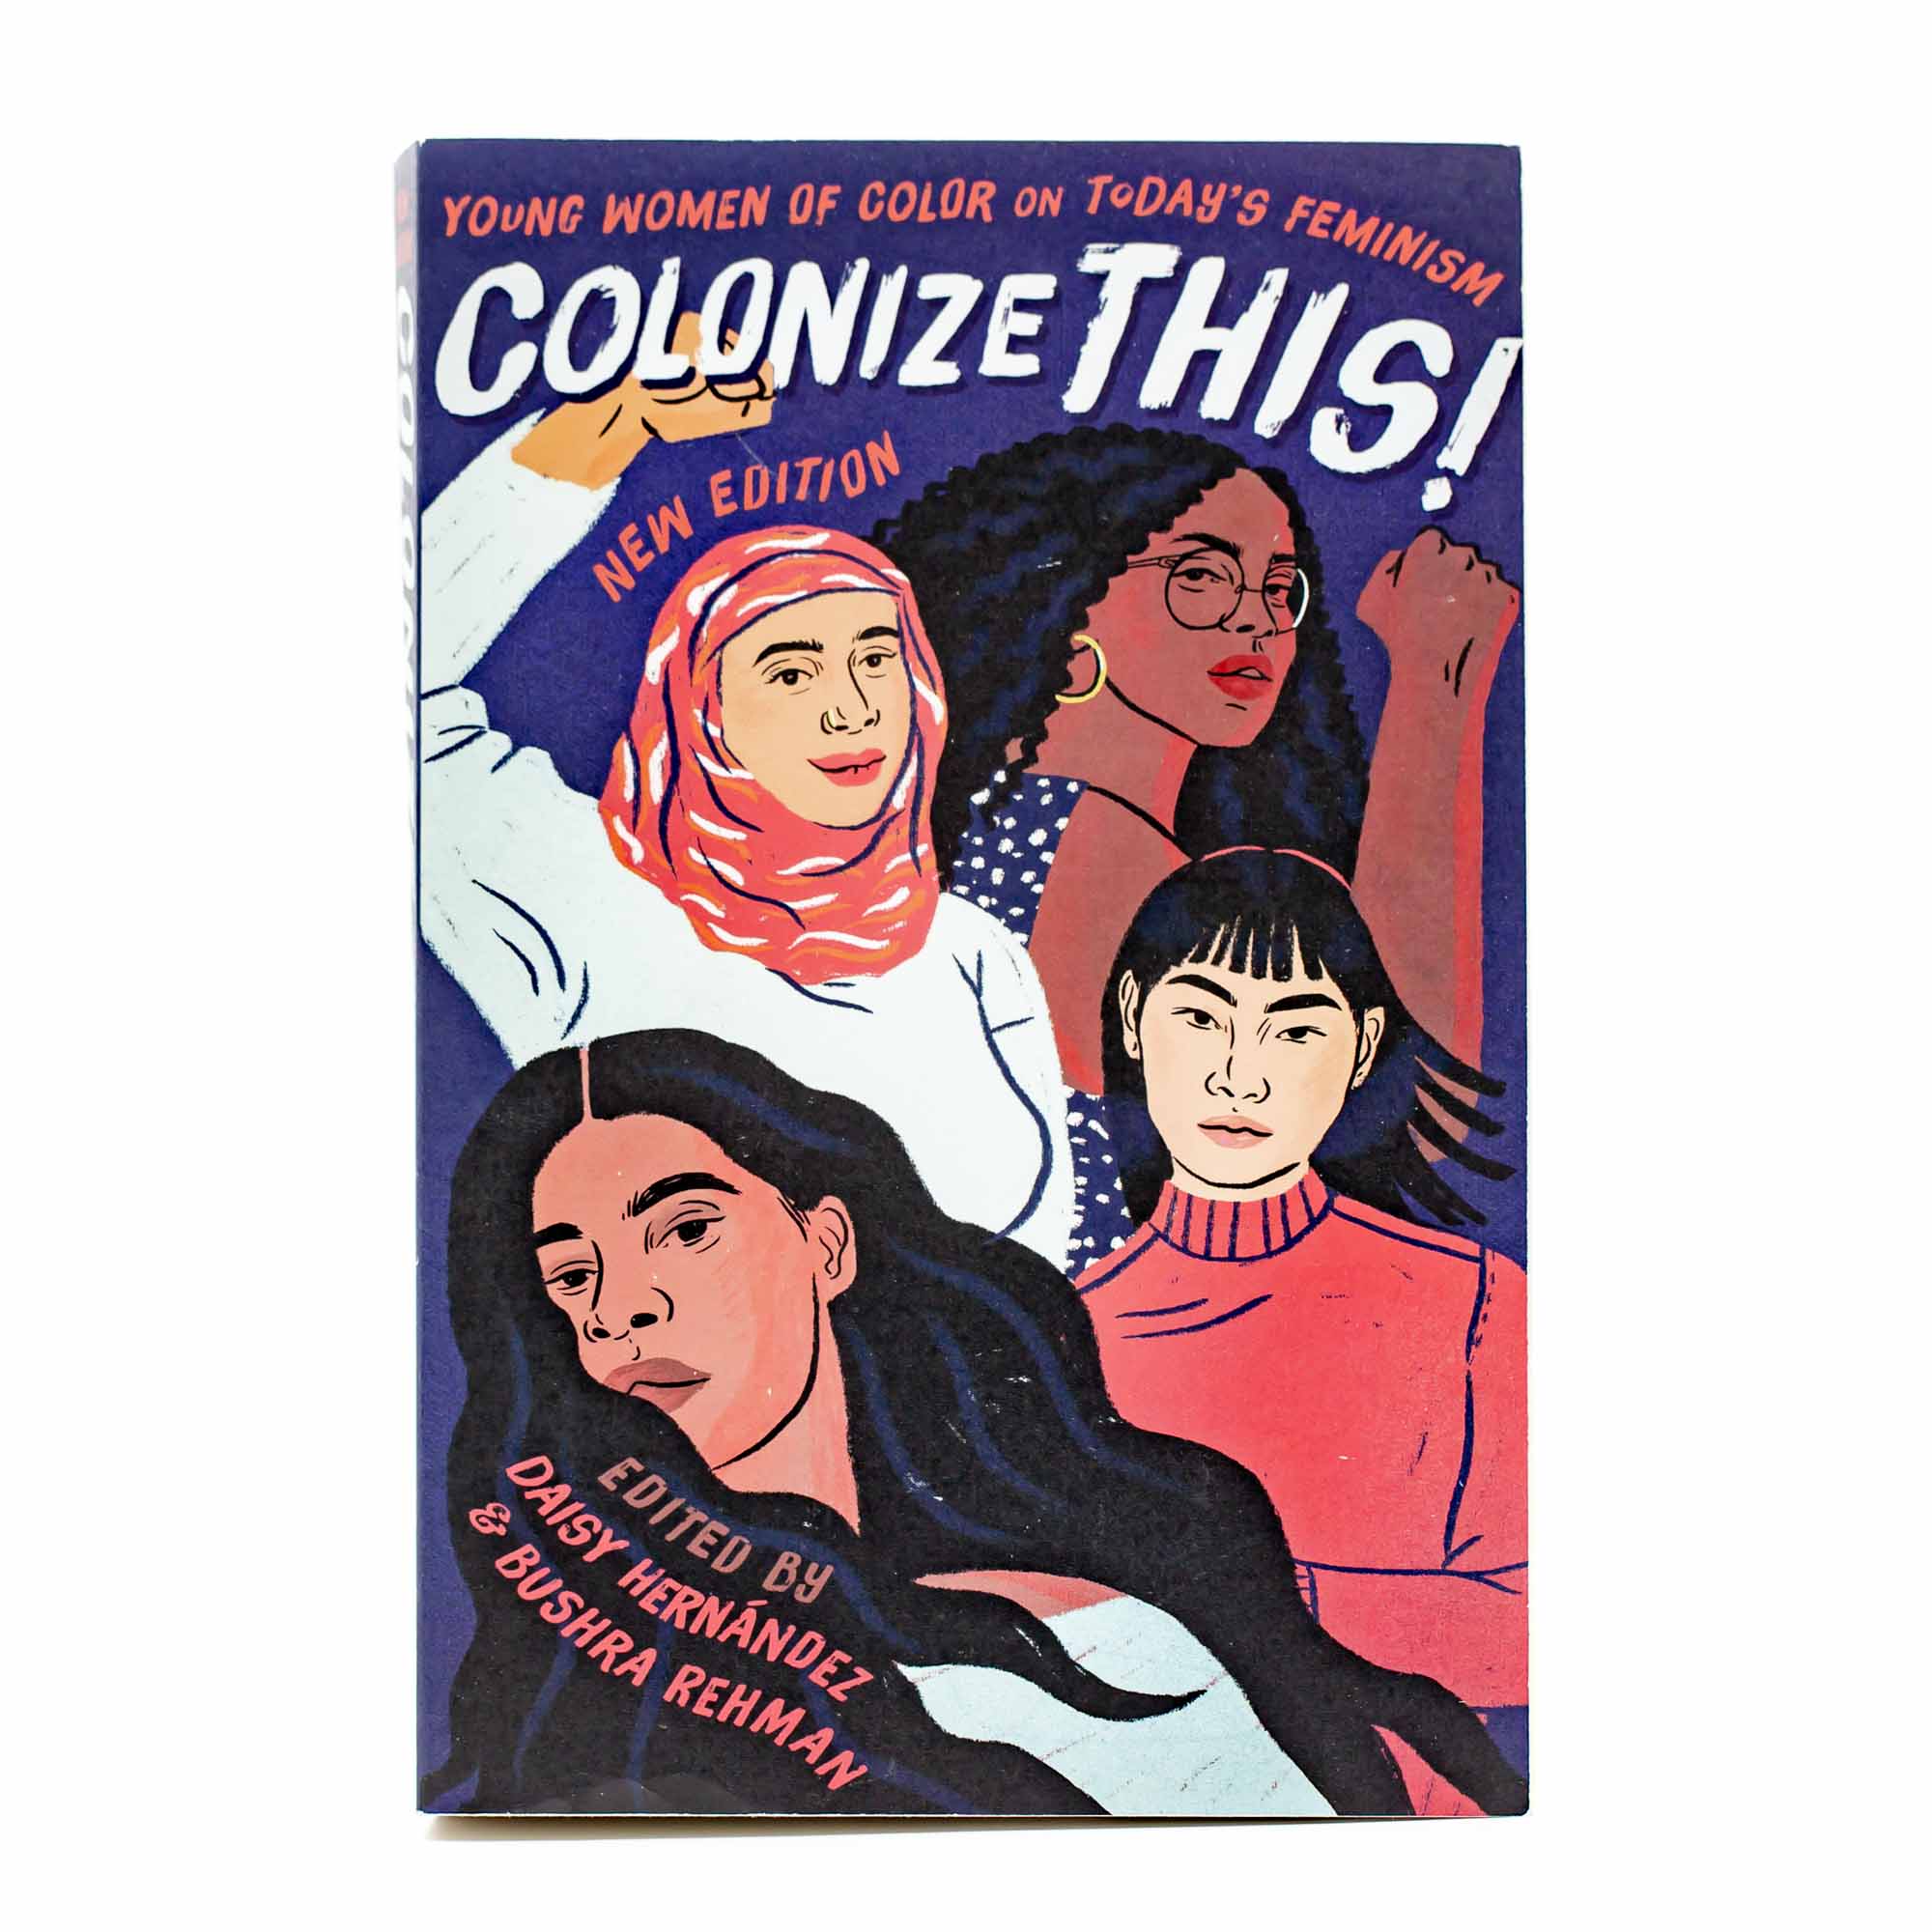 Colonize This!: Young Women of Color on Today's Feminism - Mortise And Tenon